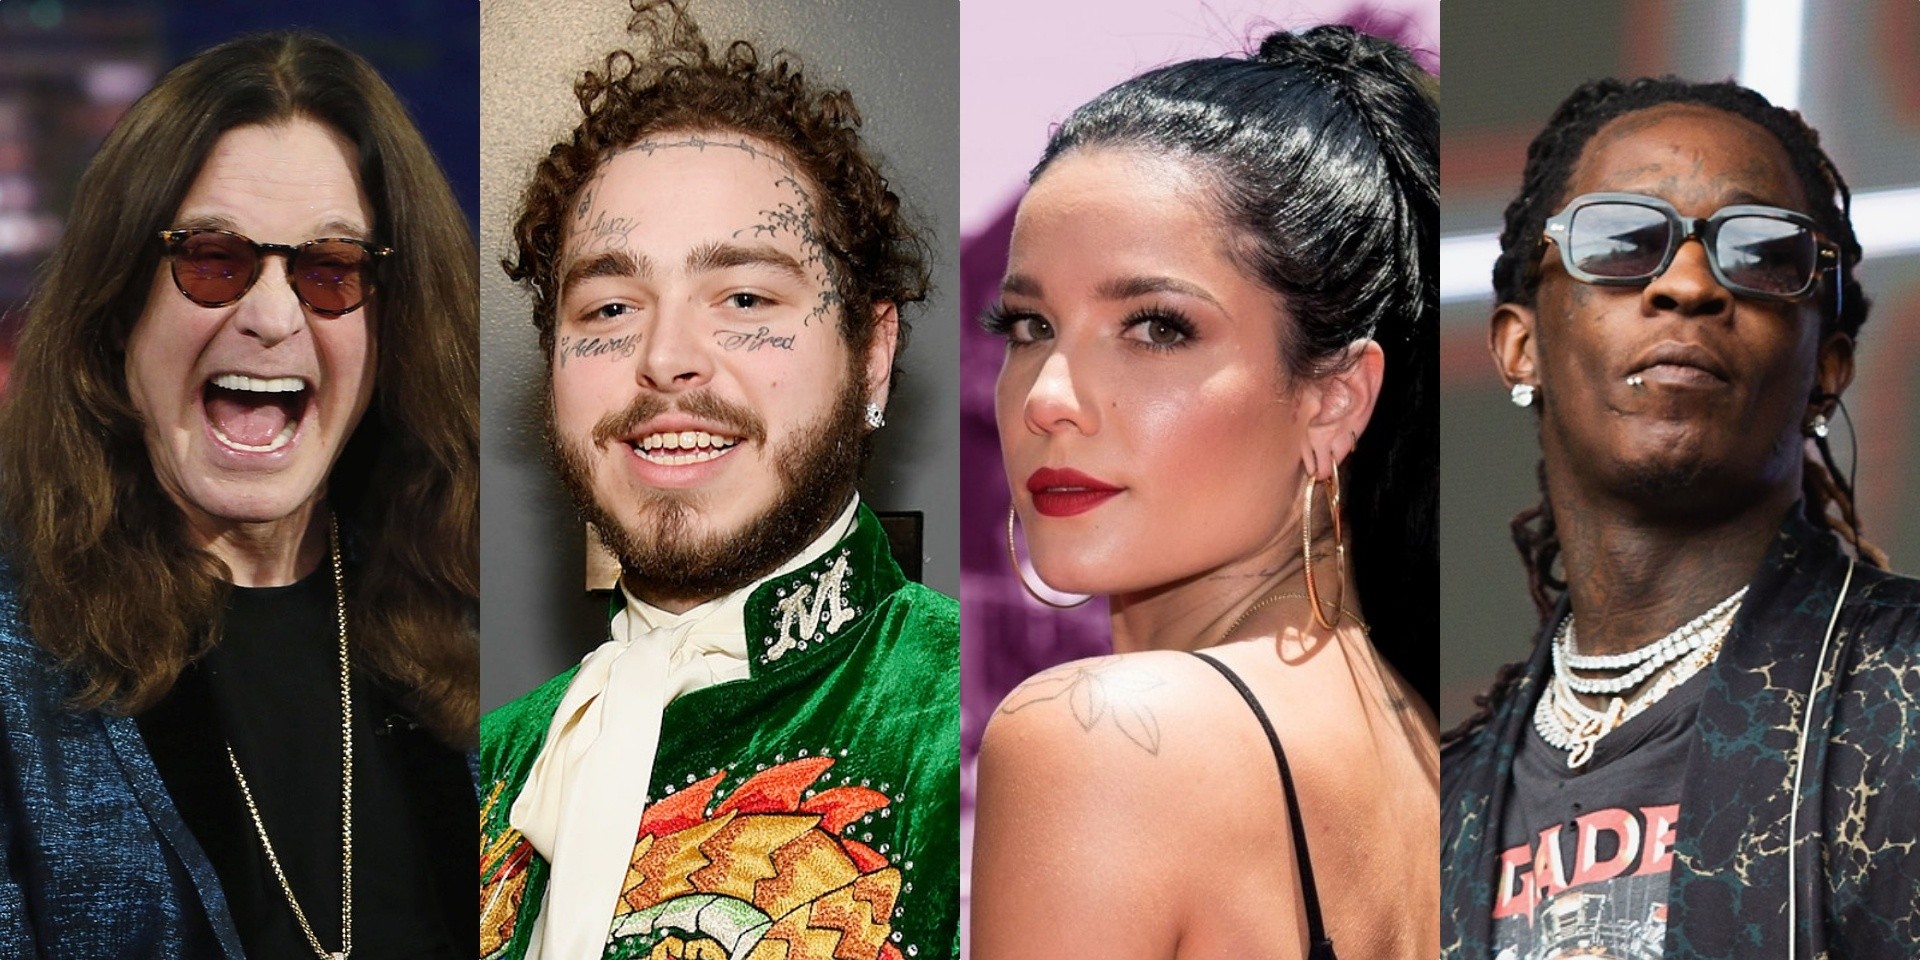 Post Malone shares list of collaborators on upcoming album, appearances by Ozzy Osbourne, Halsey, Young Thug and more confirmed